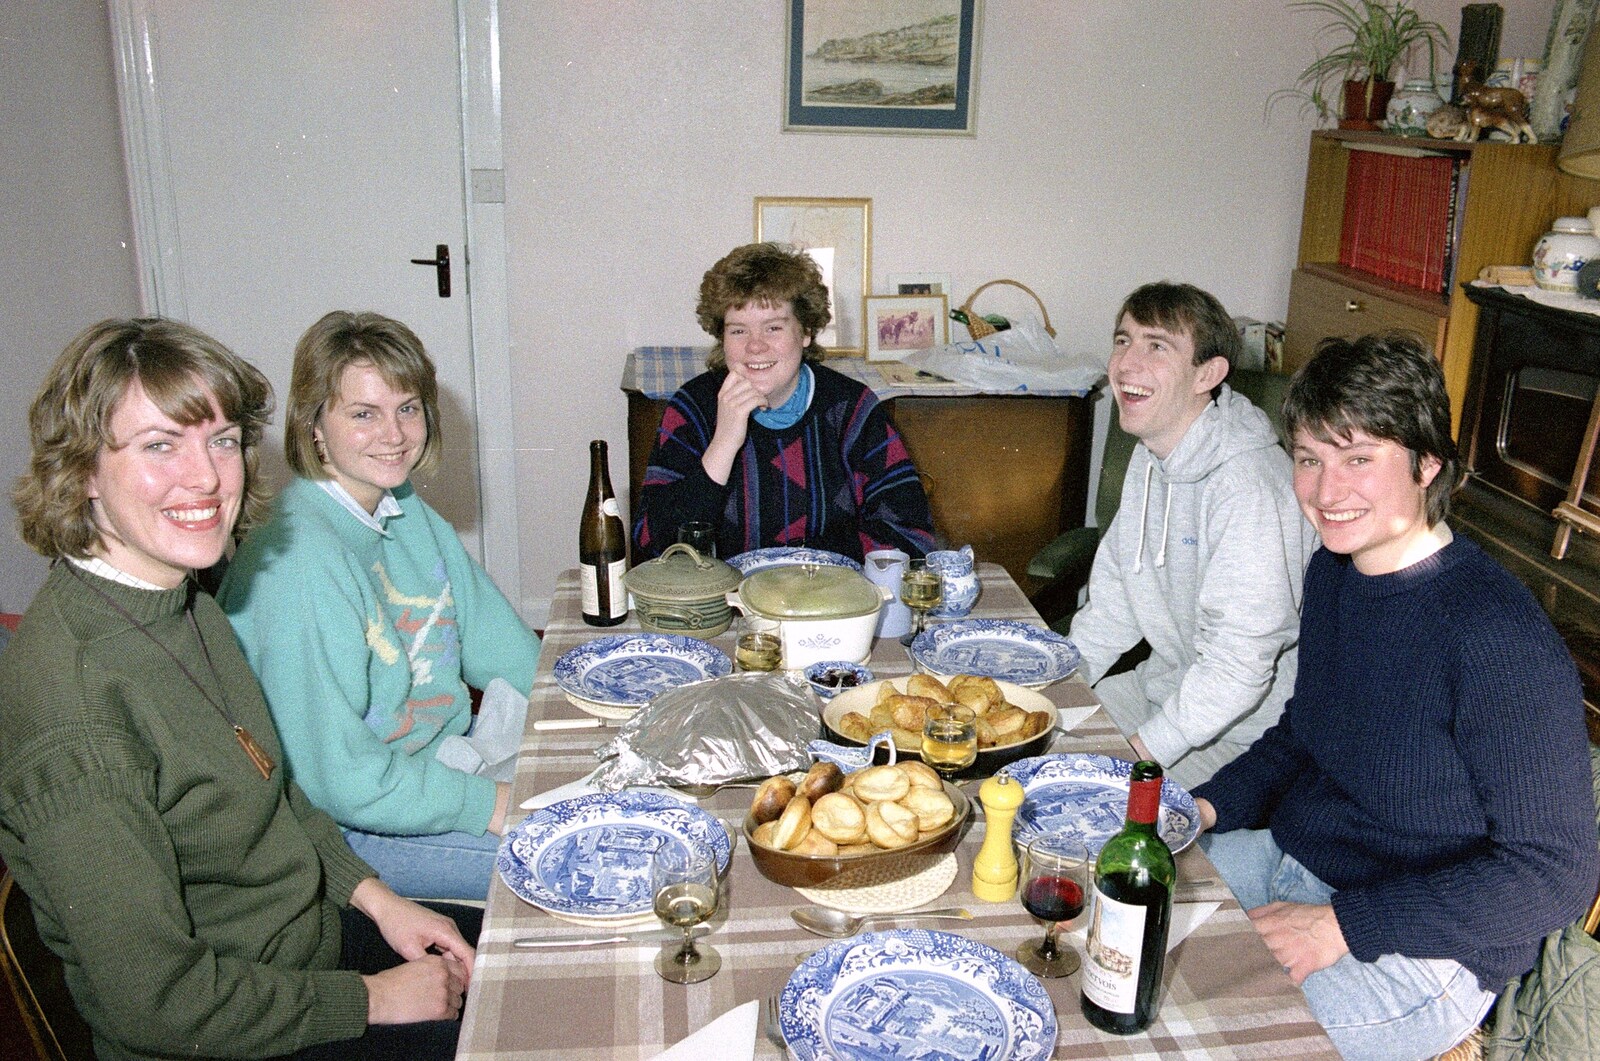 Nosher does Sunday roast for the gang from Uni: Wembury and Slapton, Devon - 18th March 1989